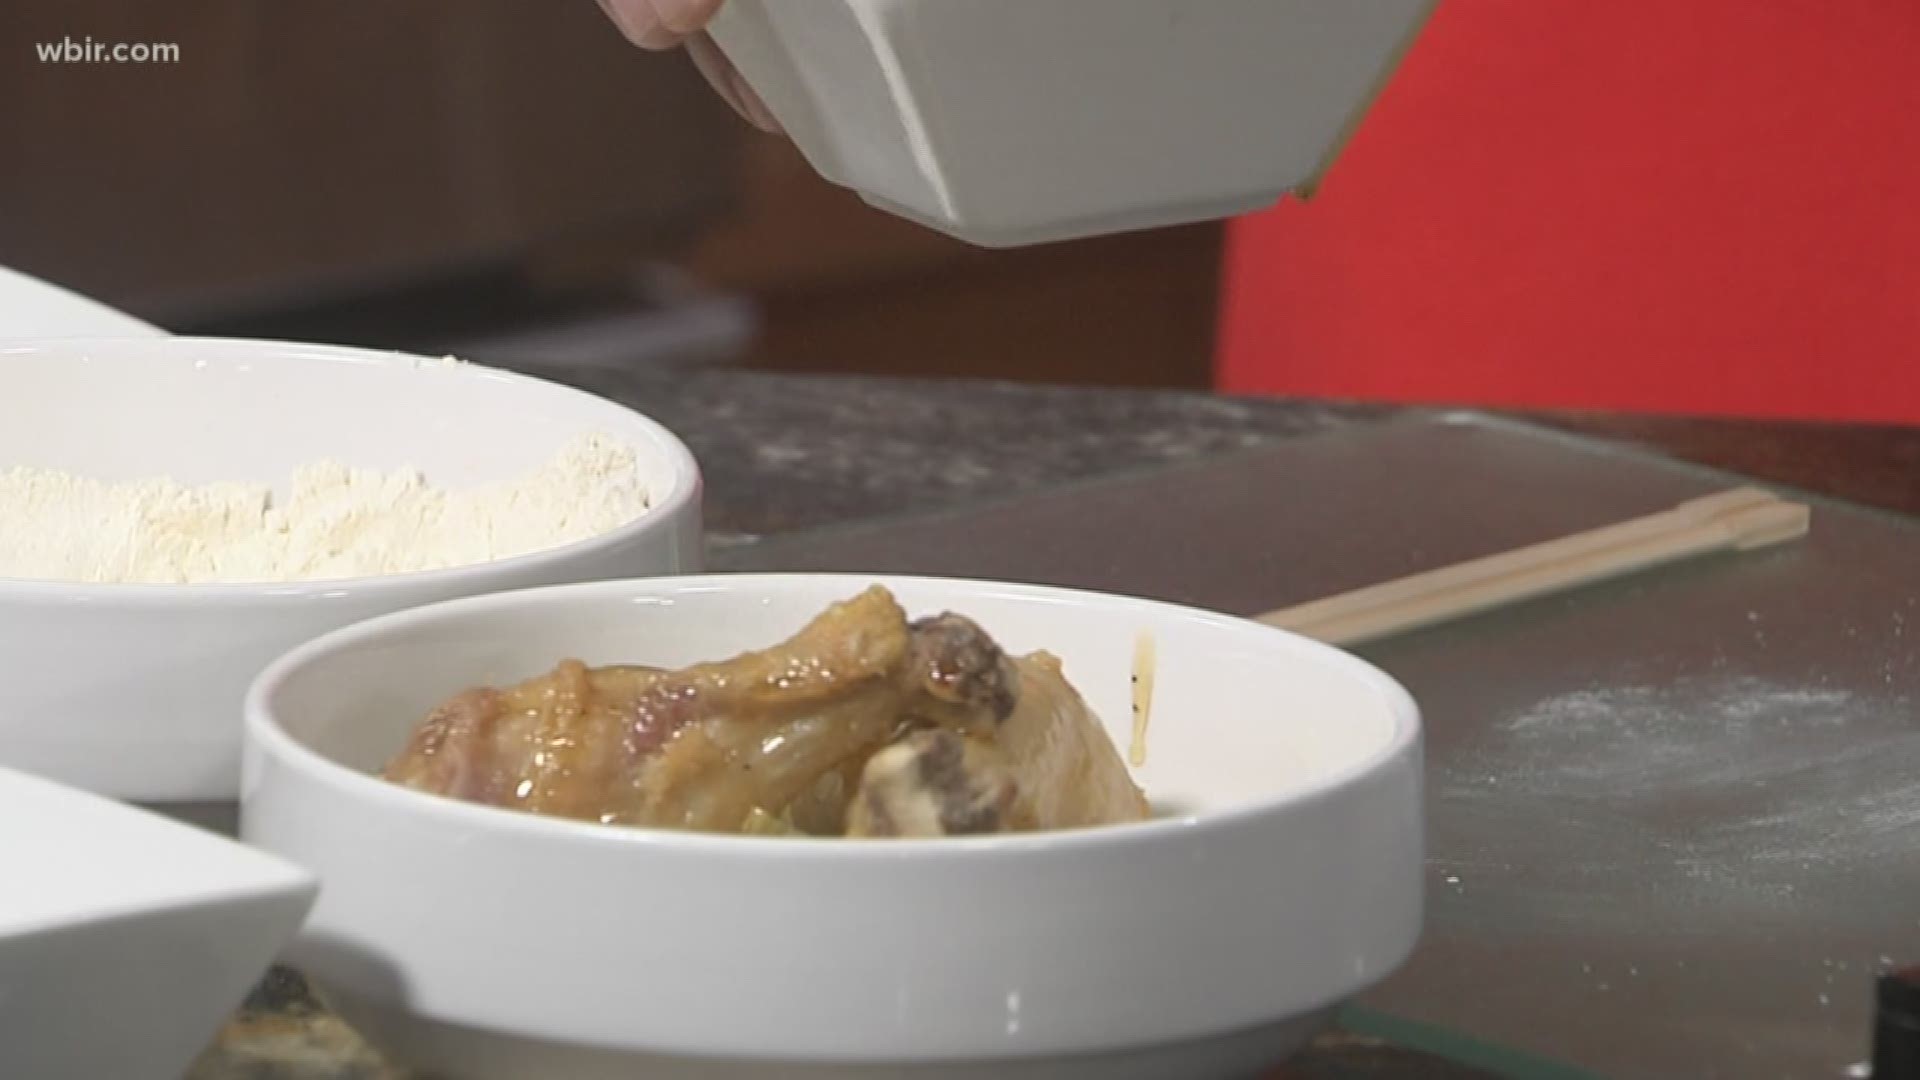 Tomo Japanese Restaurant shows us how to make "JFC," which stands for Japanese fried chicken.